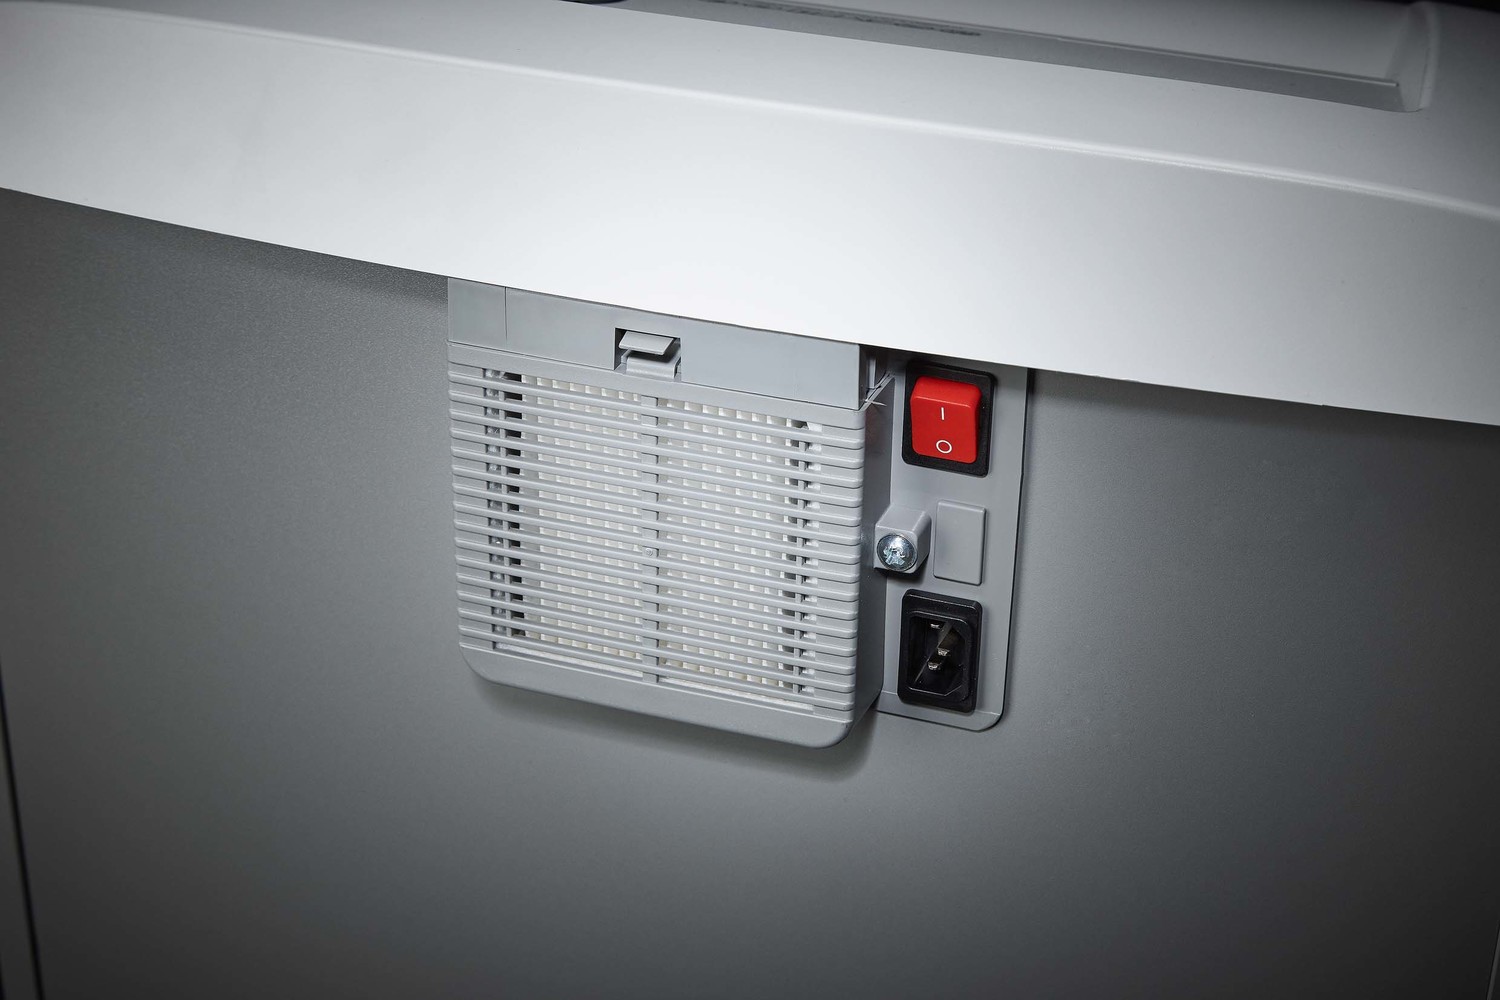 Separate main switch is located on the rear of the document shredder and completely disconnects it from the mains power supply